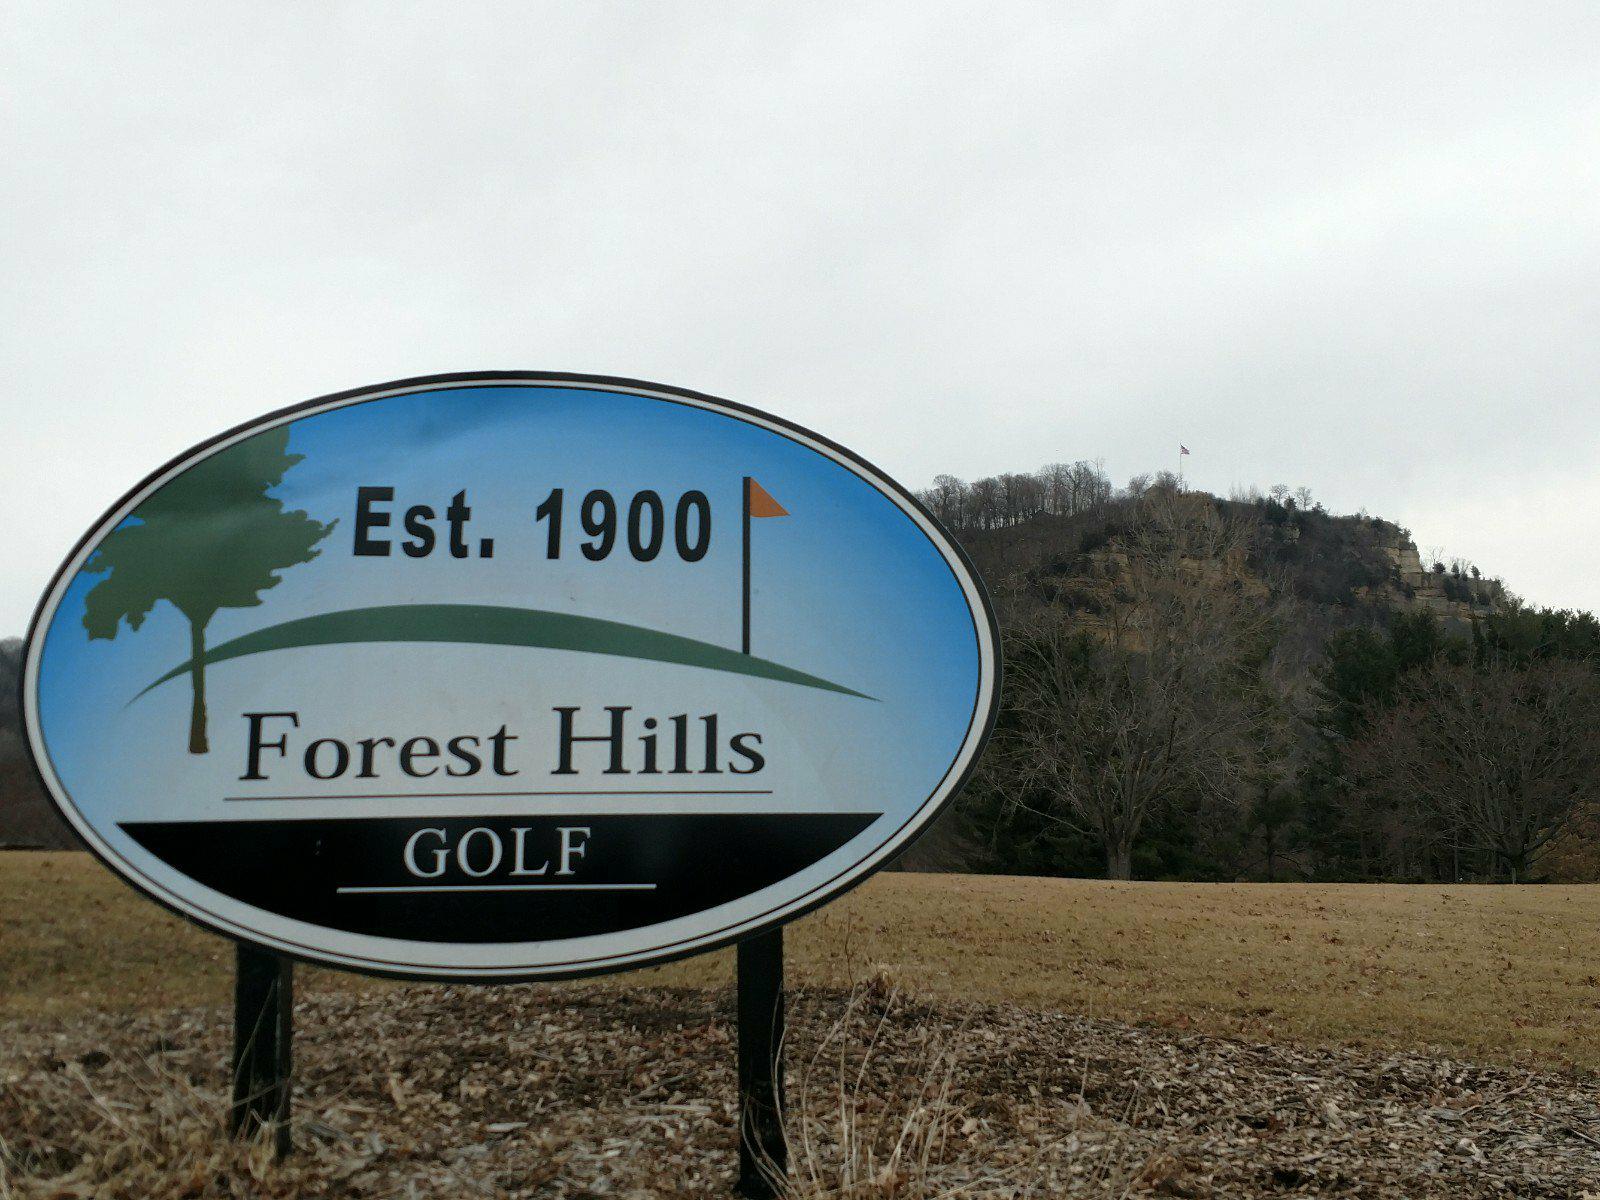 Plans for new clubhouse at Forest Hills in La Crosse being downsized